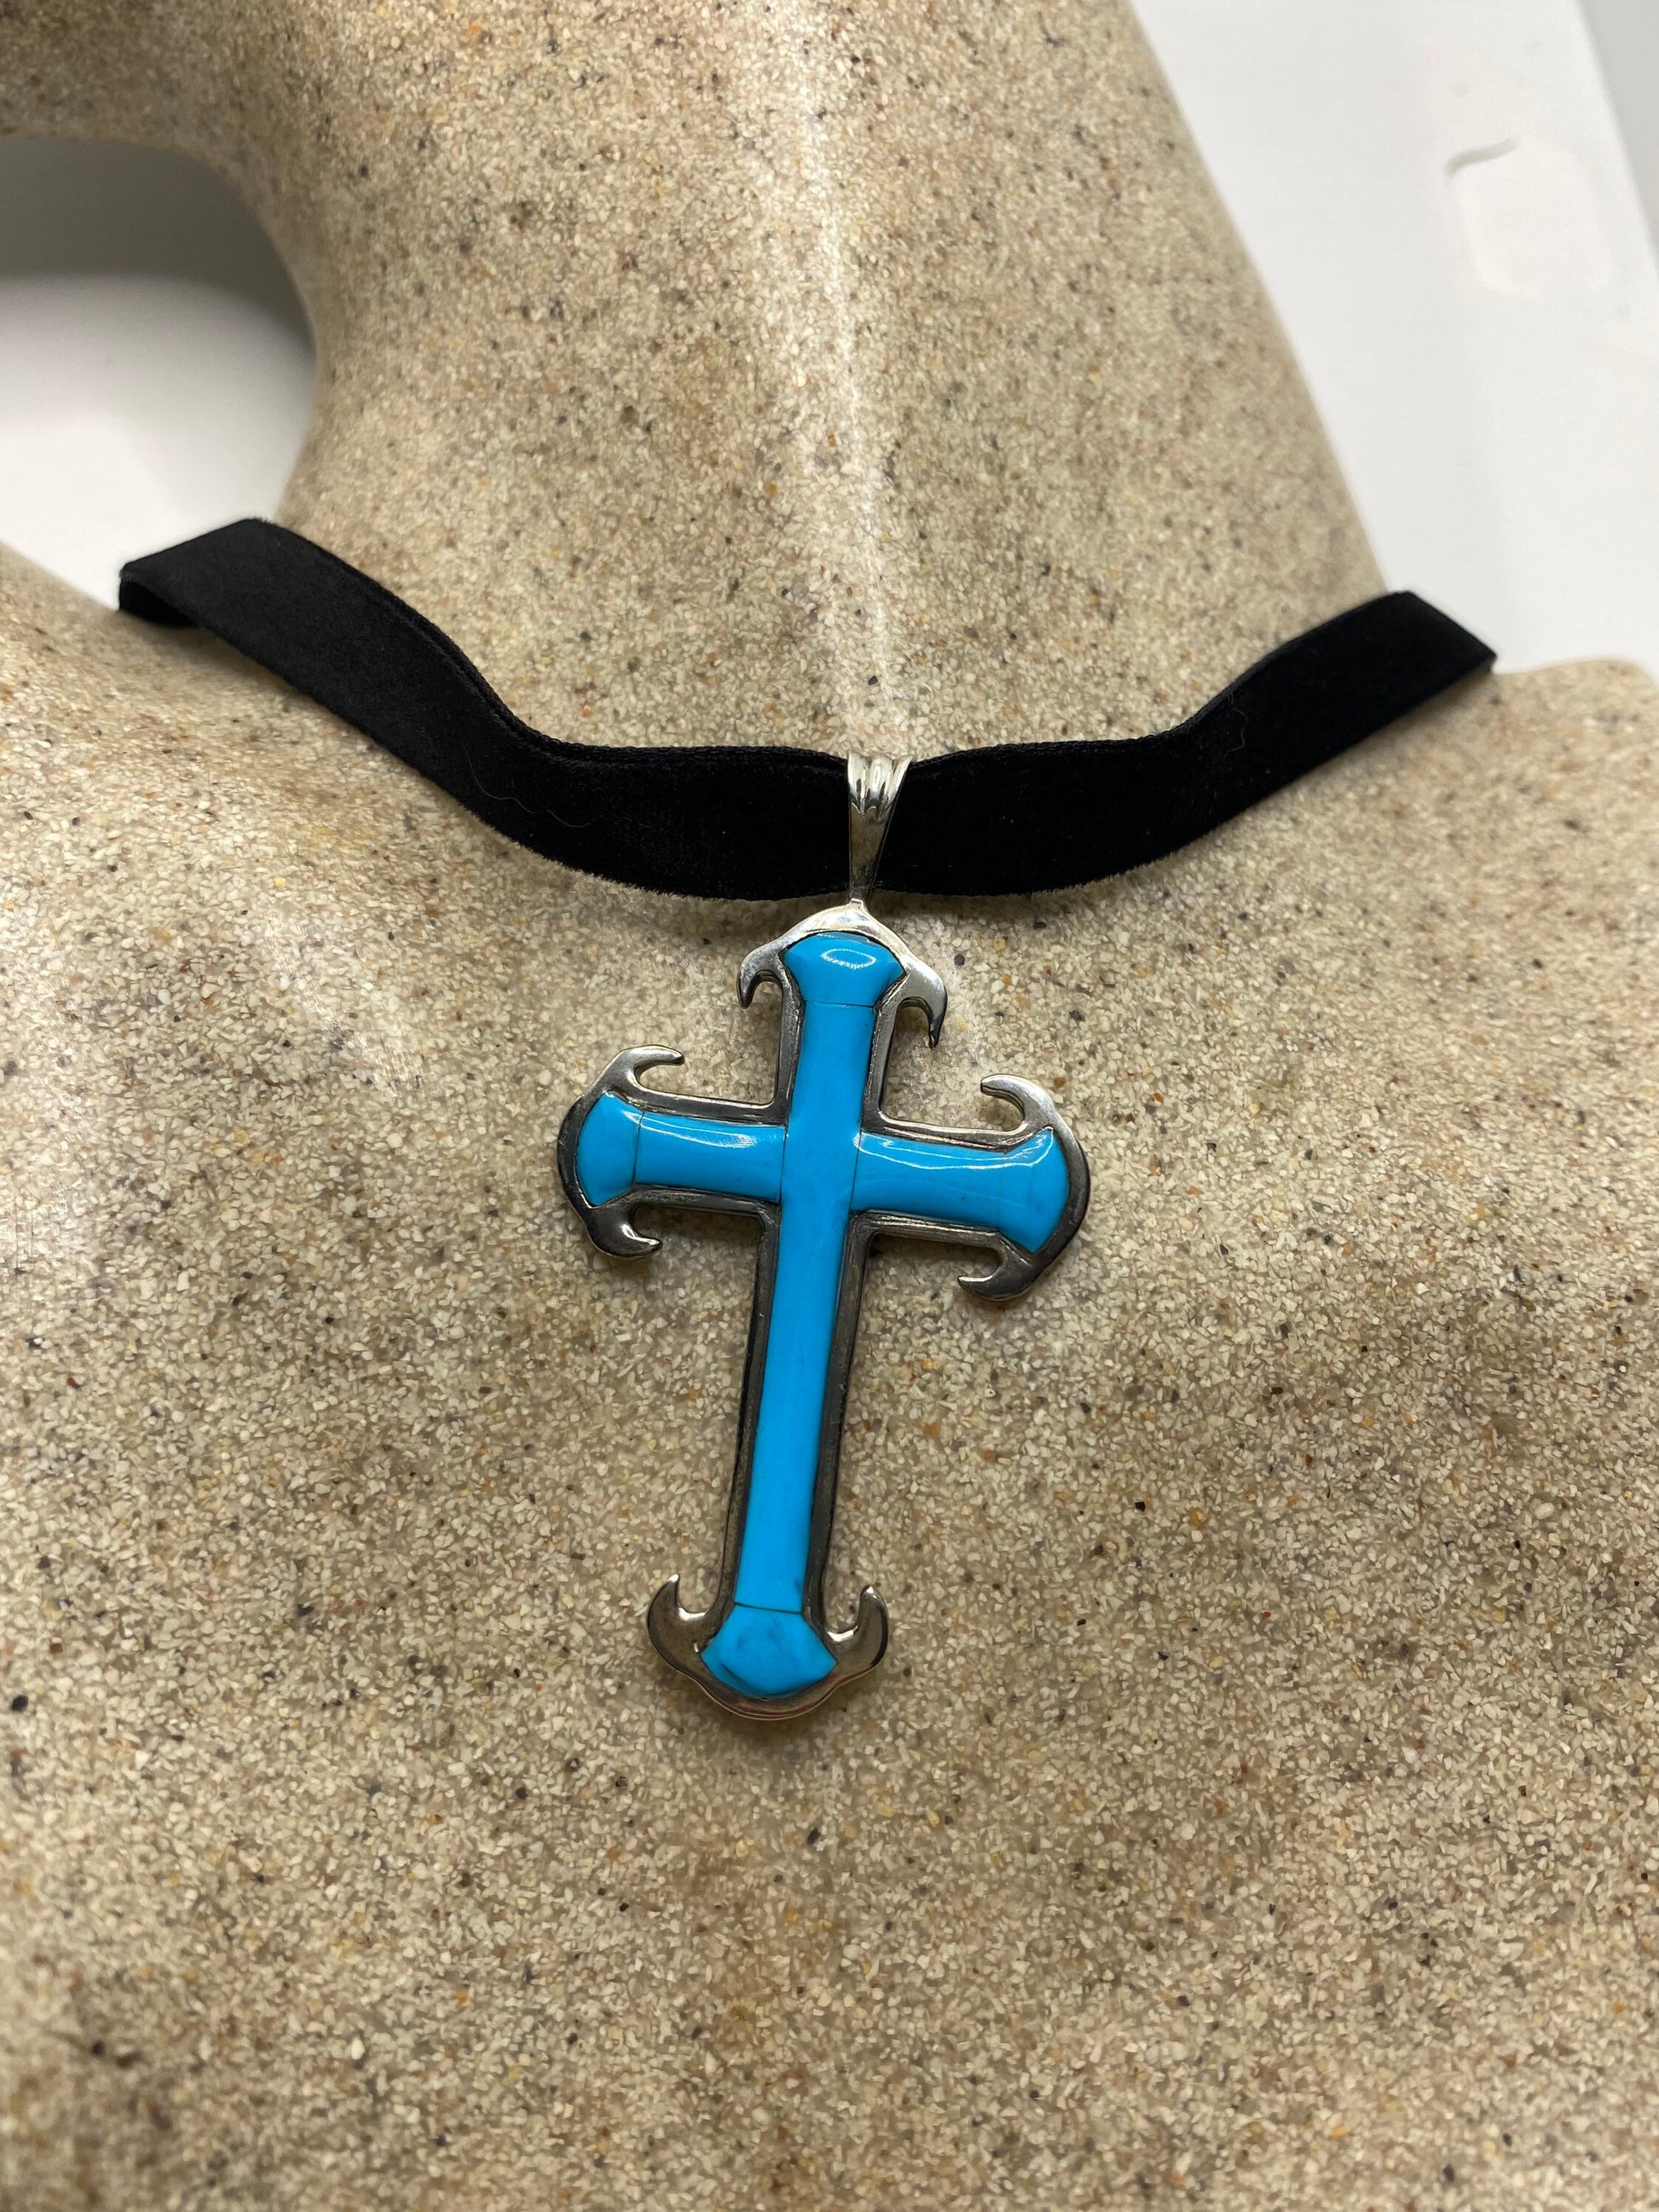 Vintage Turquoise Cross Choker 925 Sterling Silver Pendant Necklace